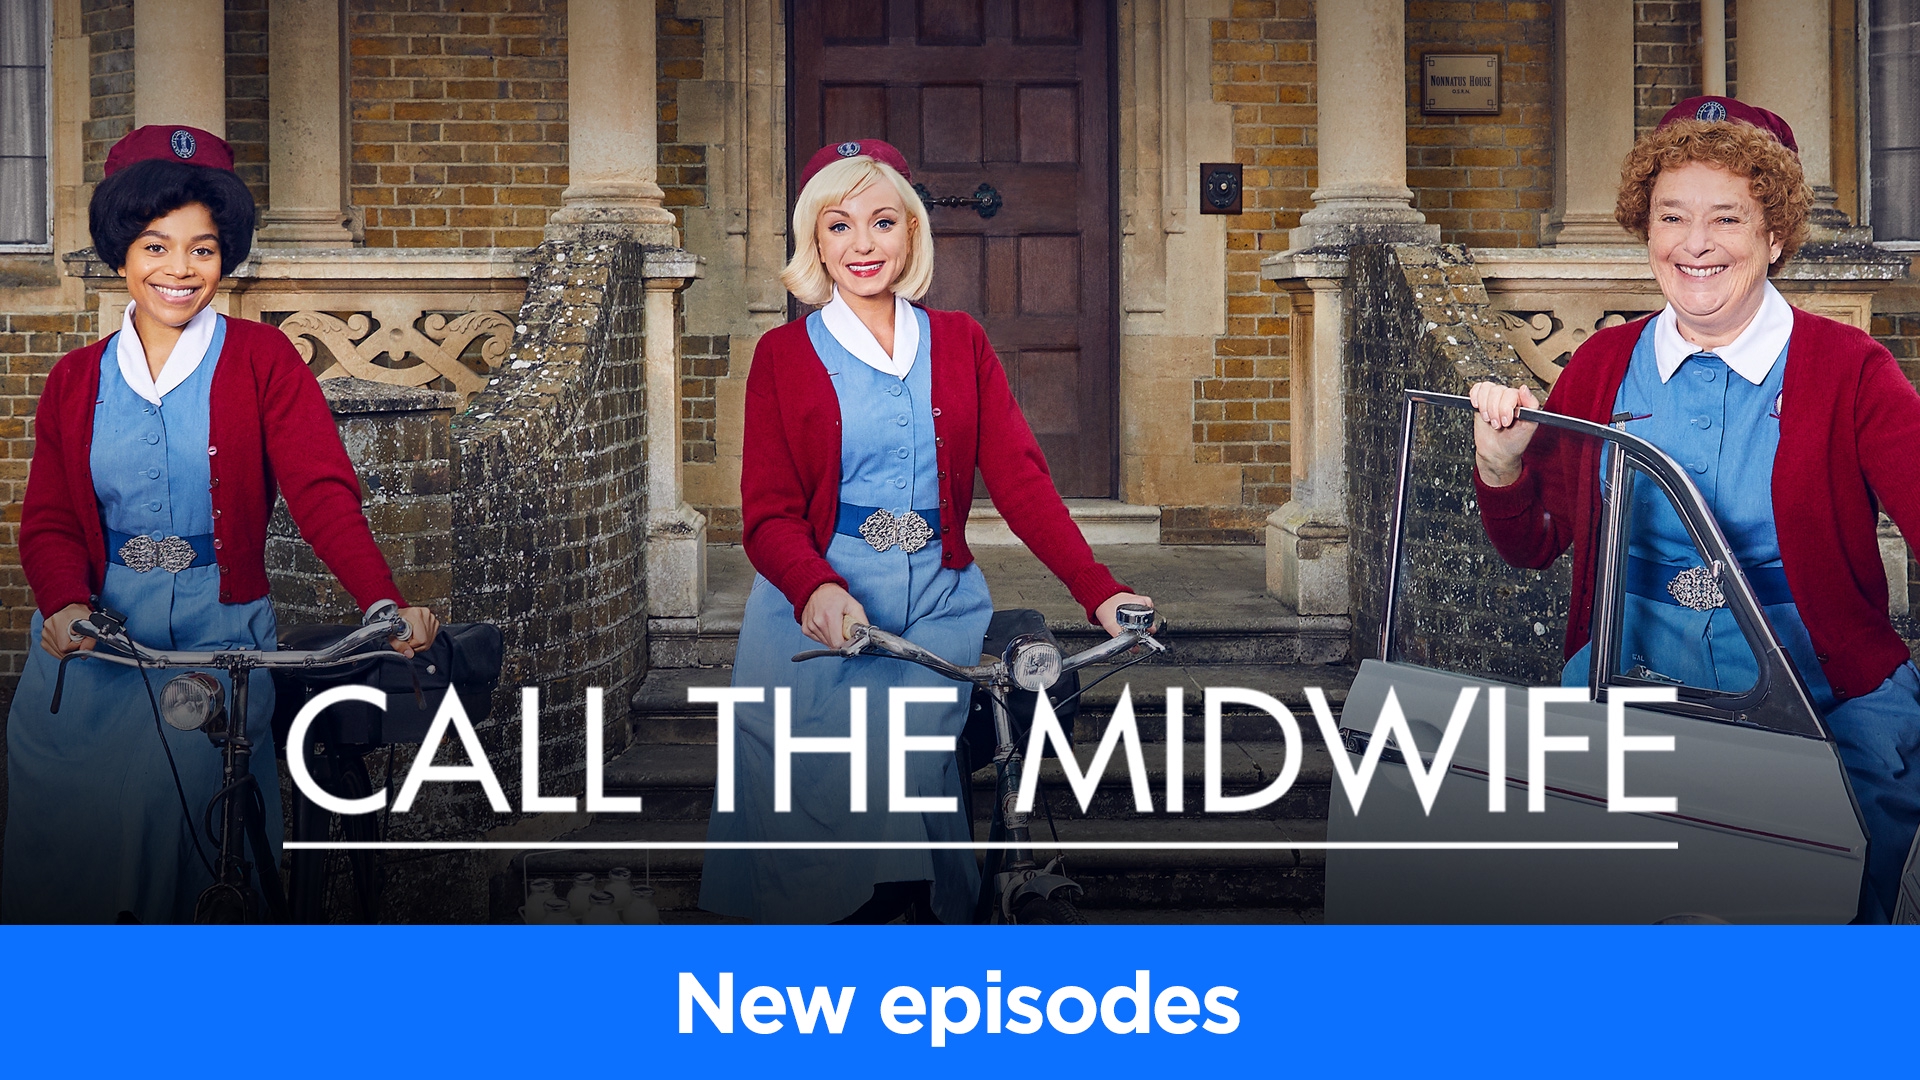 watch-call-the-midwife-online-watch-seasons-1-9-now-stan